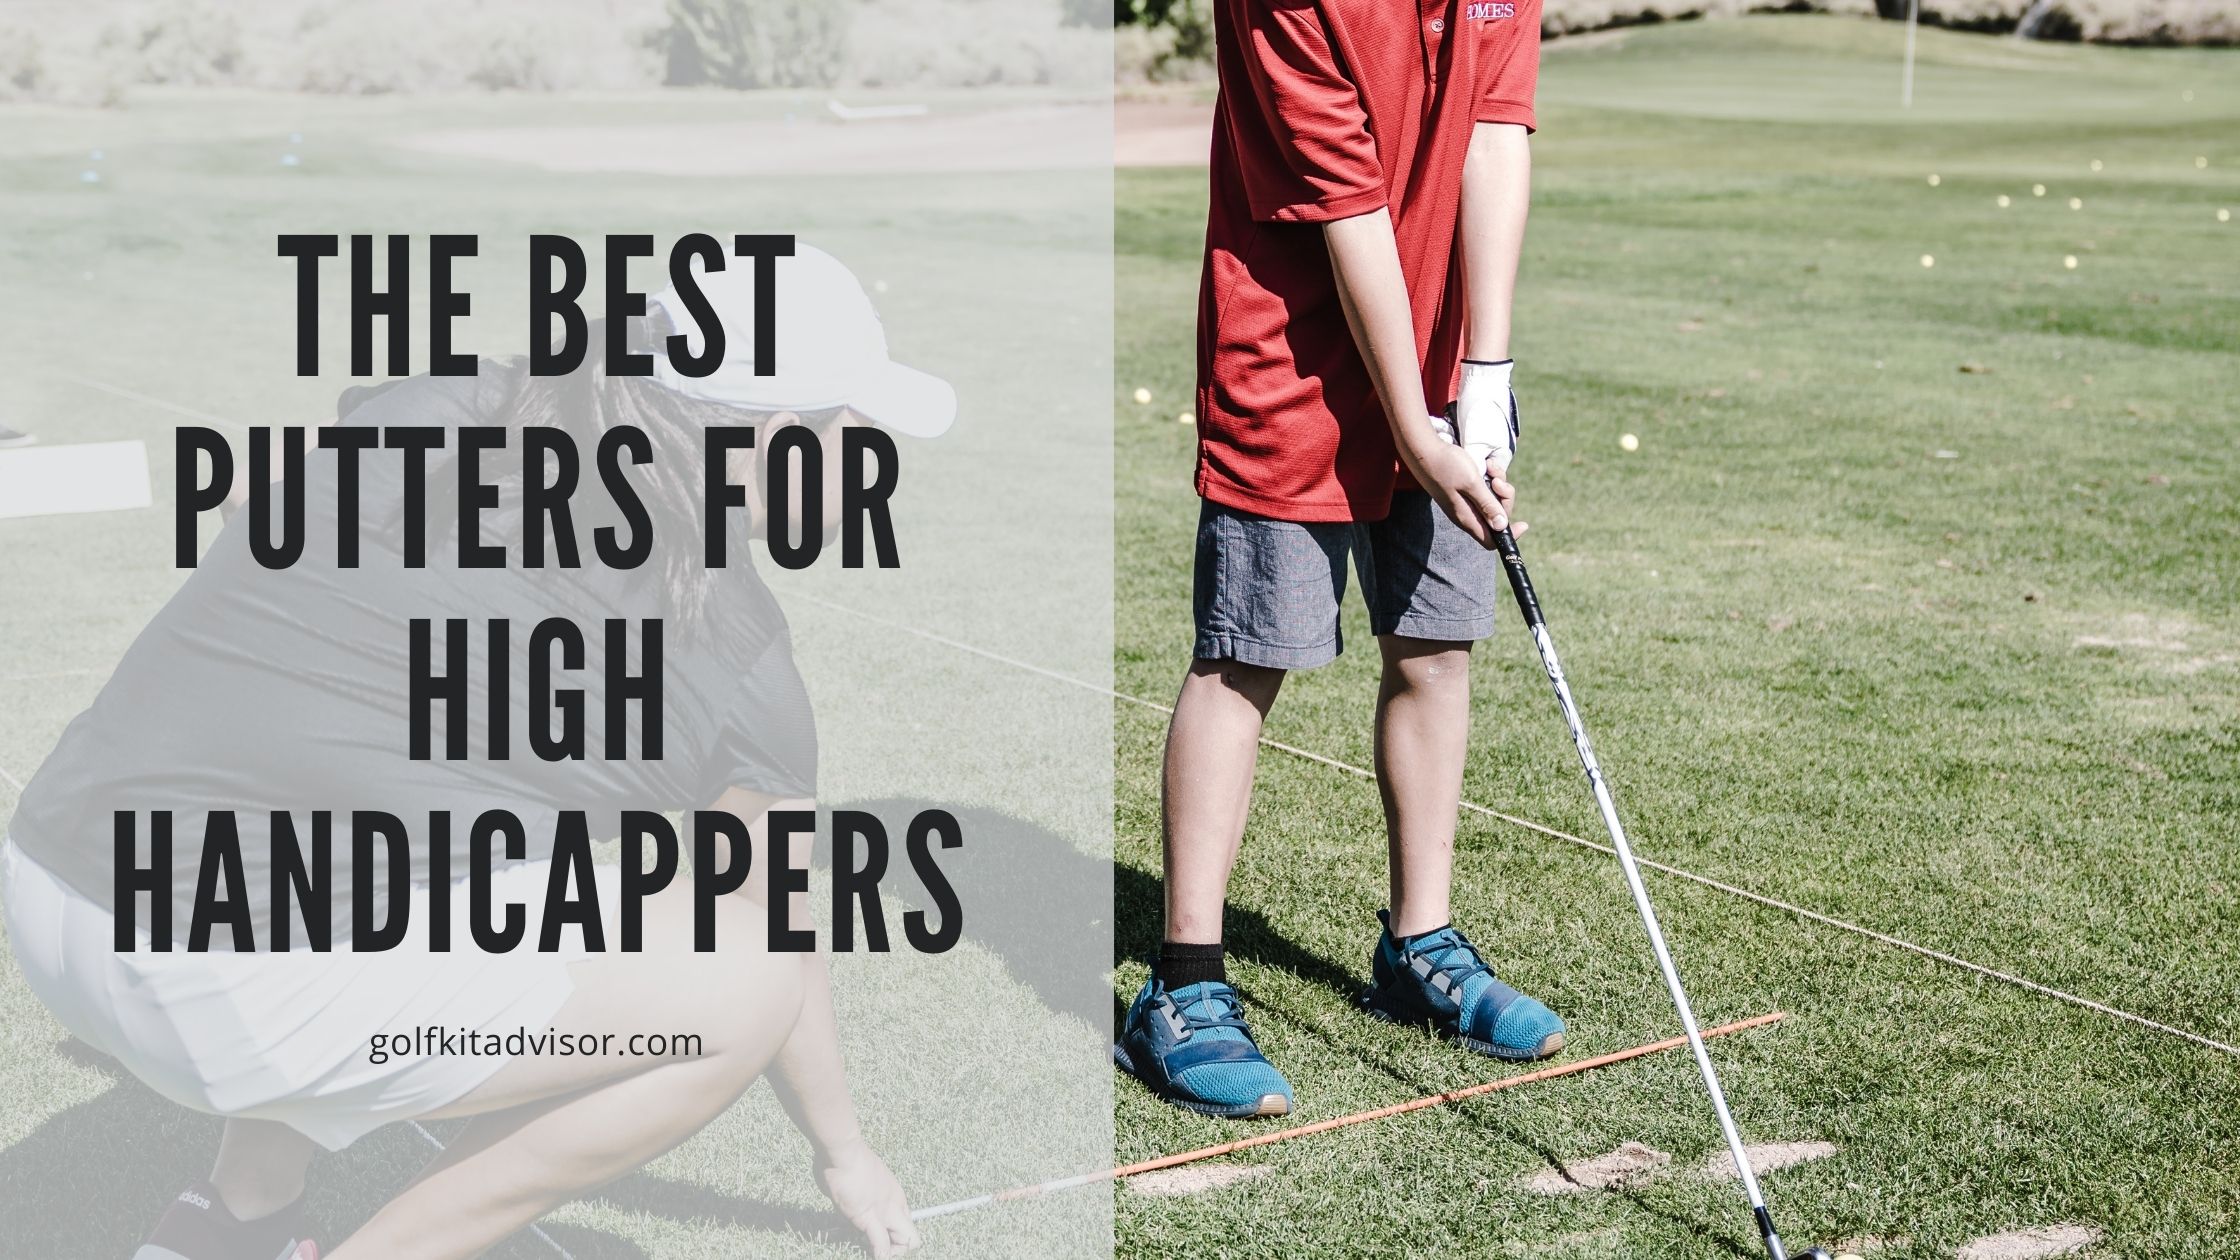 The Best Putters for High Handicappers